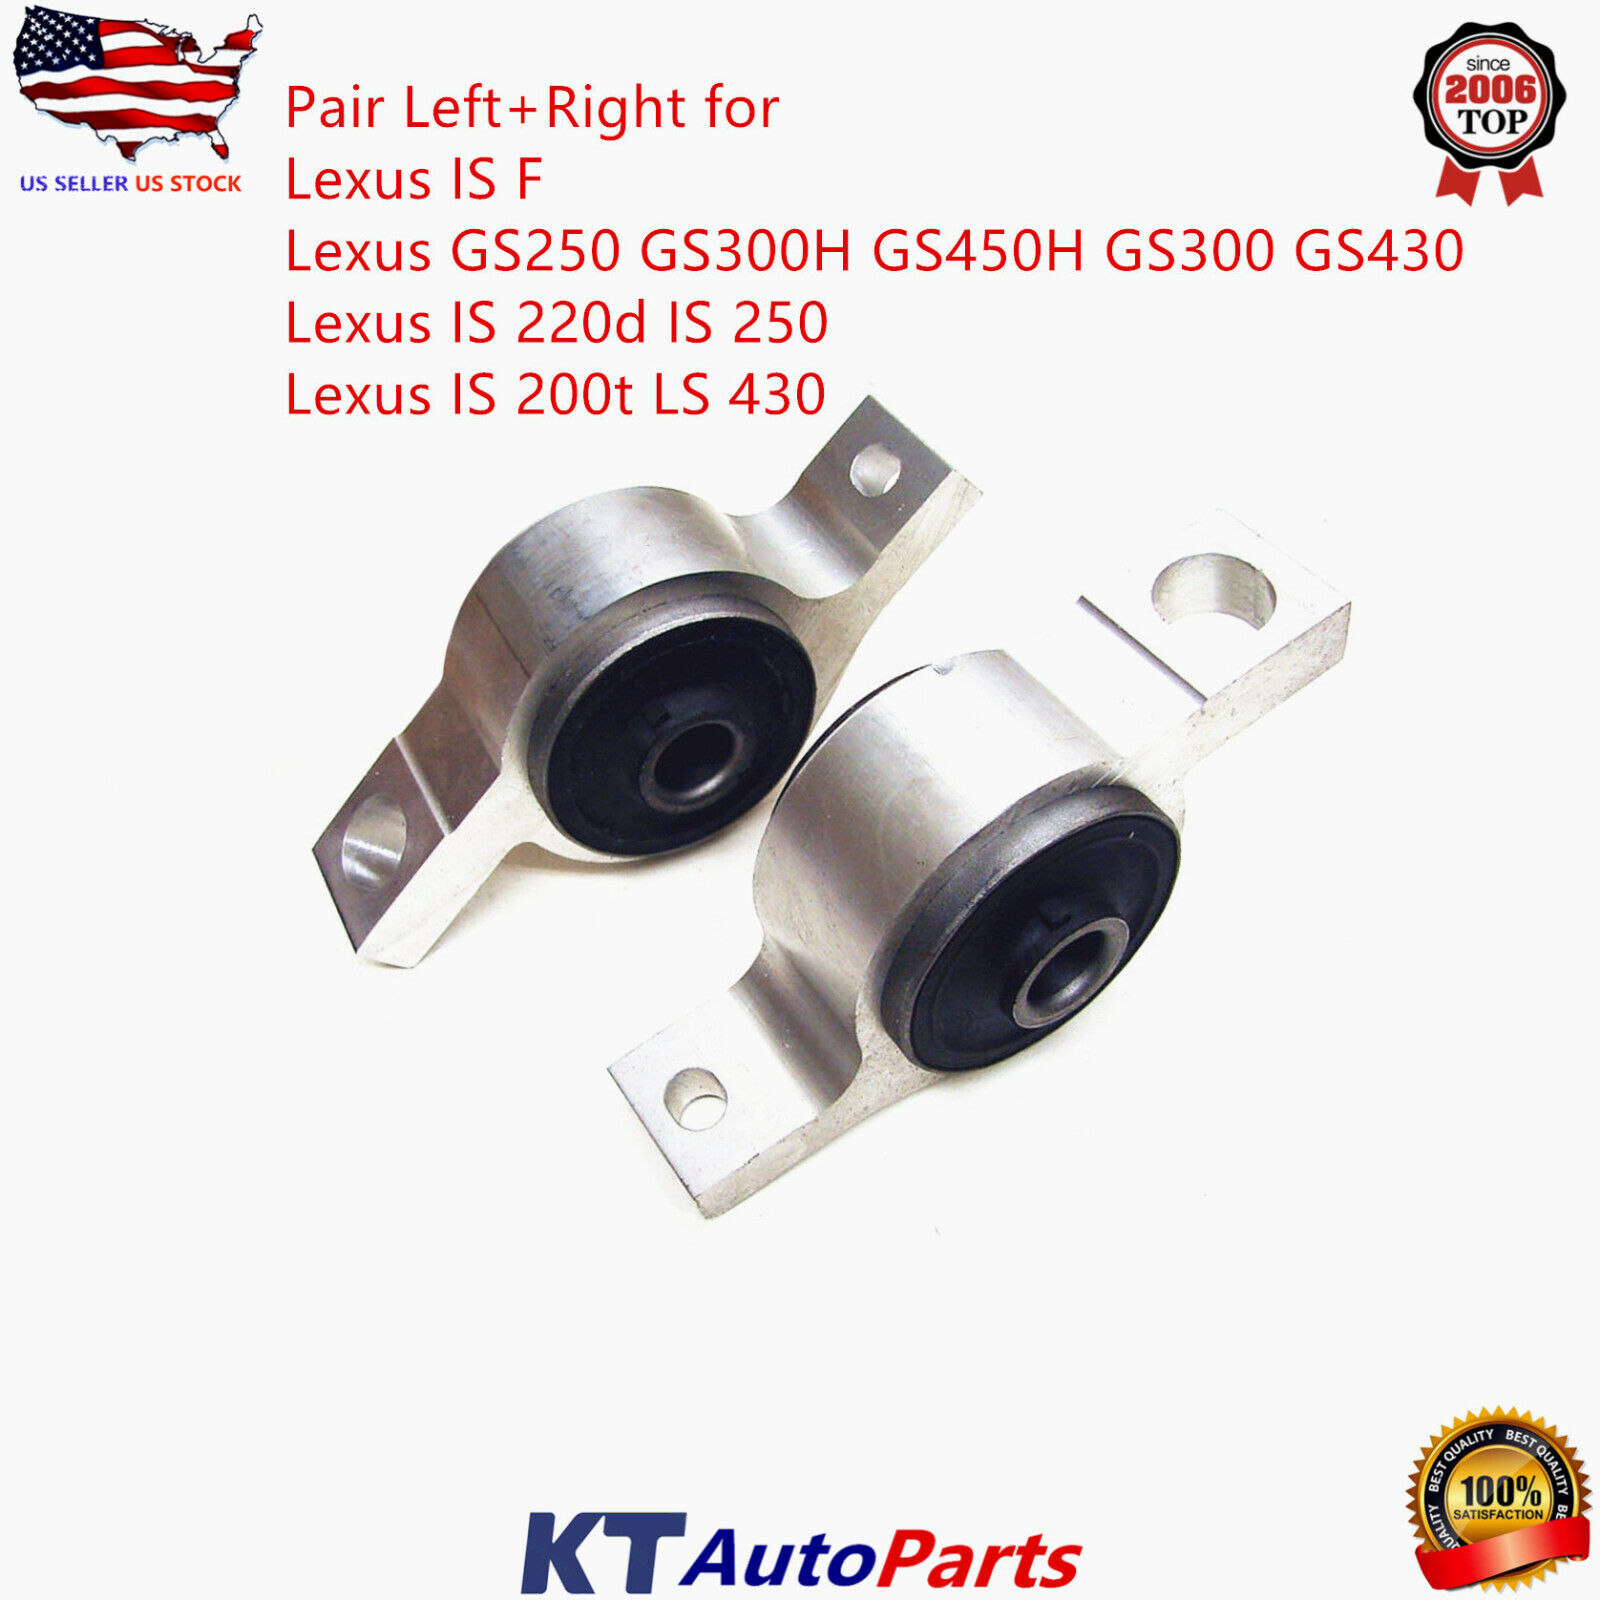 Pair Left+Right Lower Control Arm Bushing For Lexus IS F 08-14 LS430 GS300 IS250